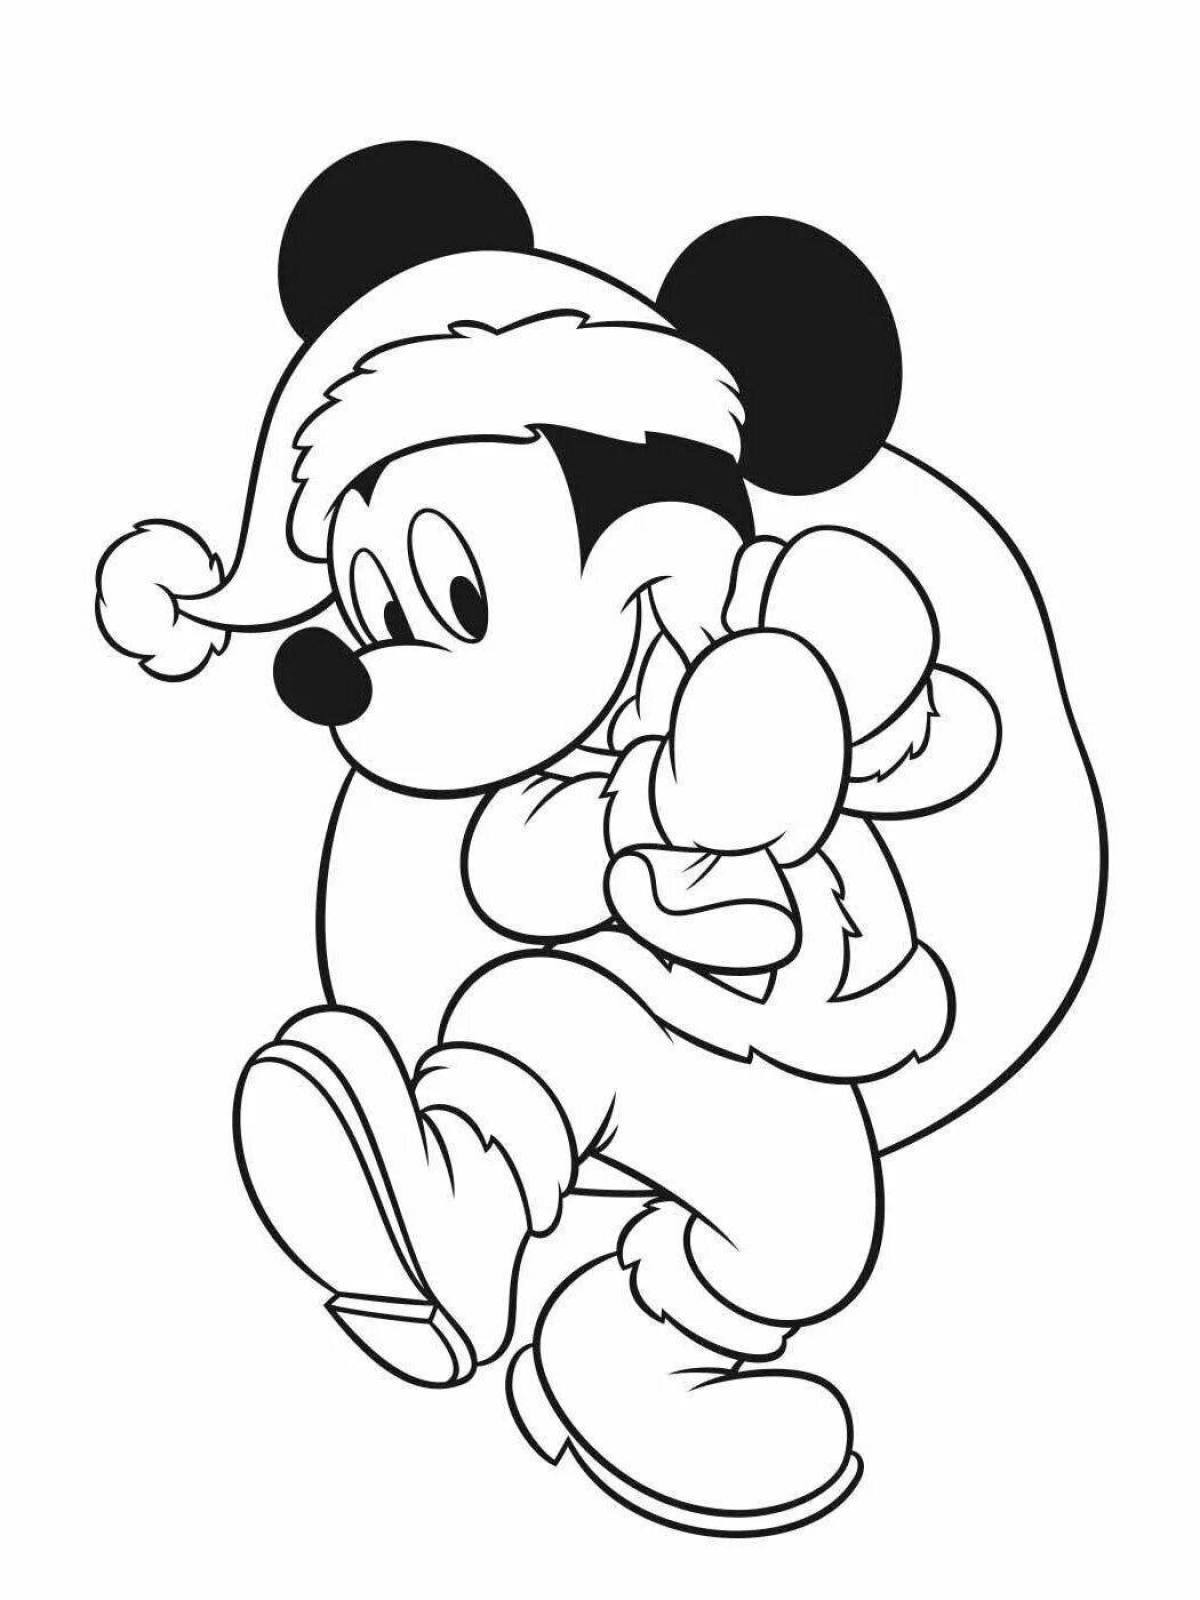 Energetic Mickey mouse Christmas coloring book